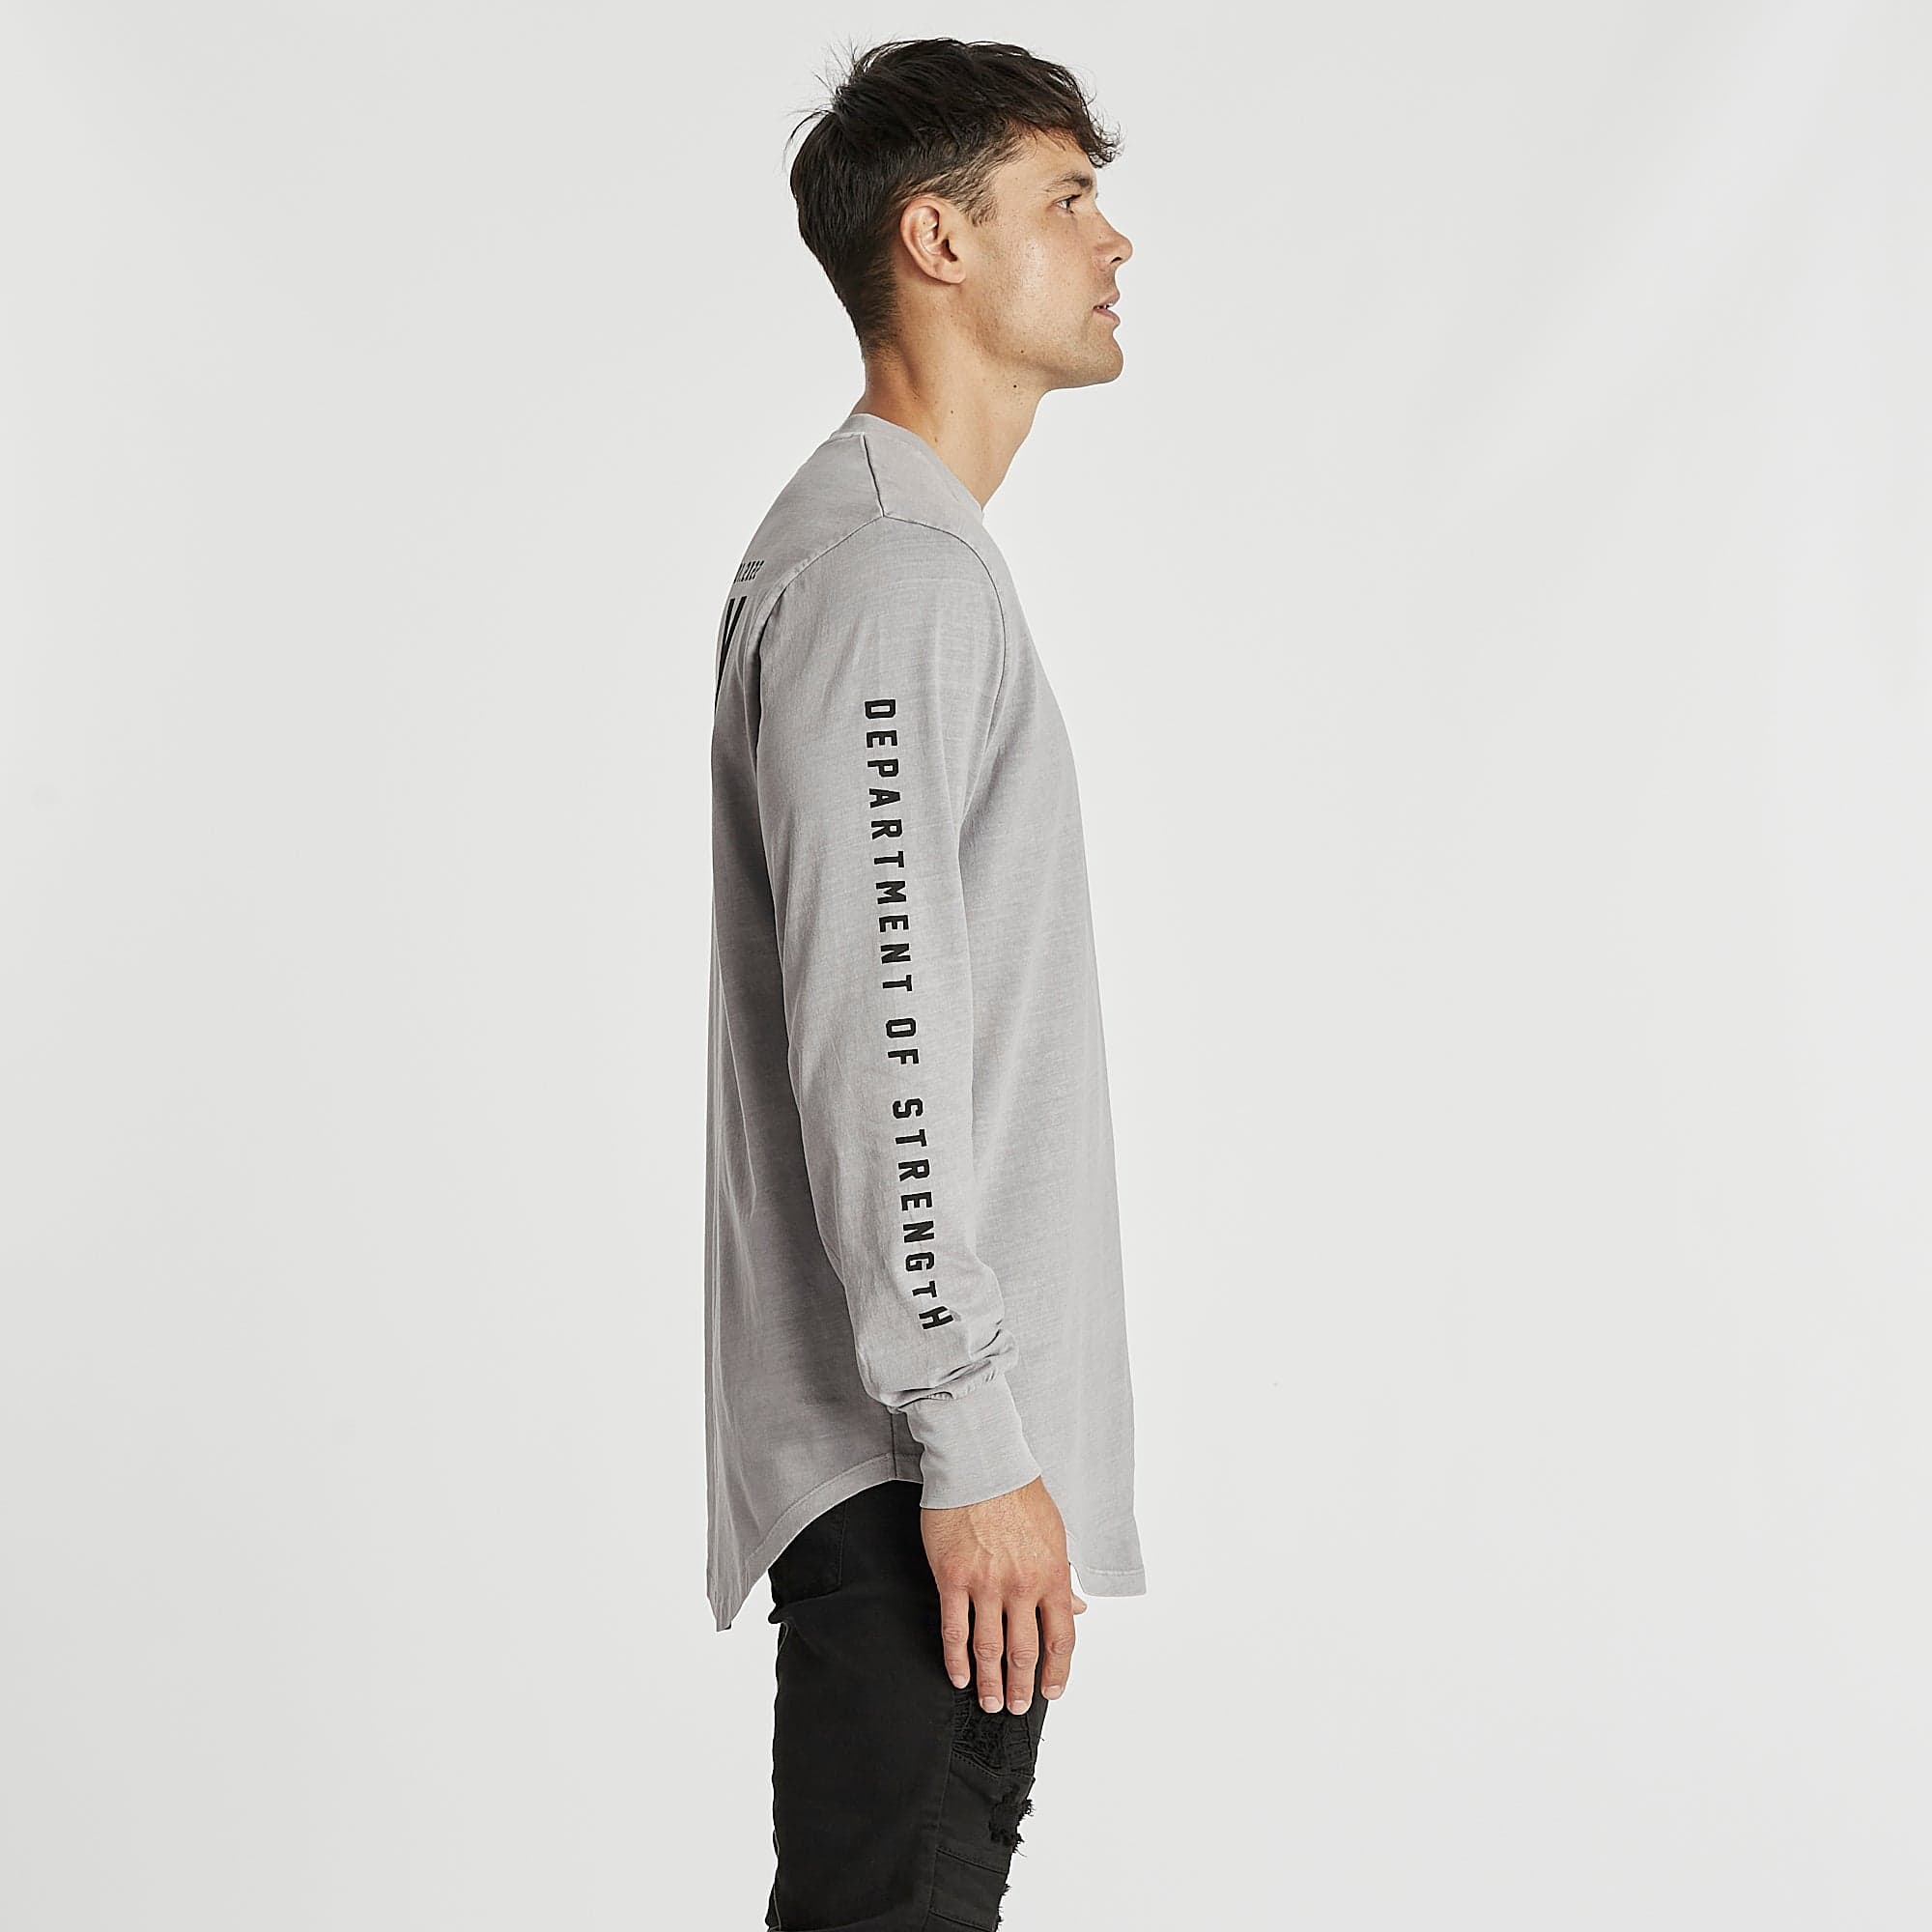 Blind Dual Curved Long Sleeve T-Shirt Pigment Gull